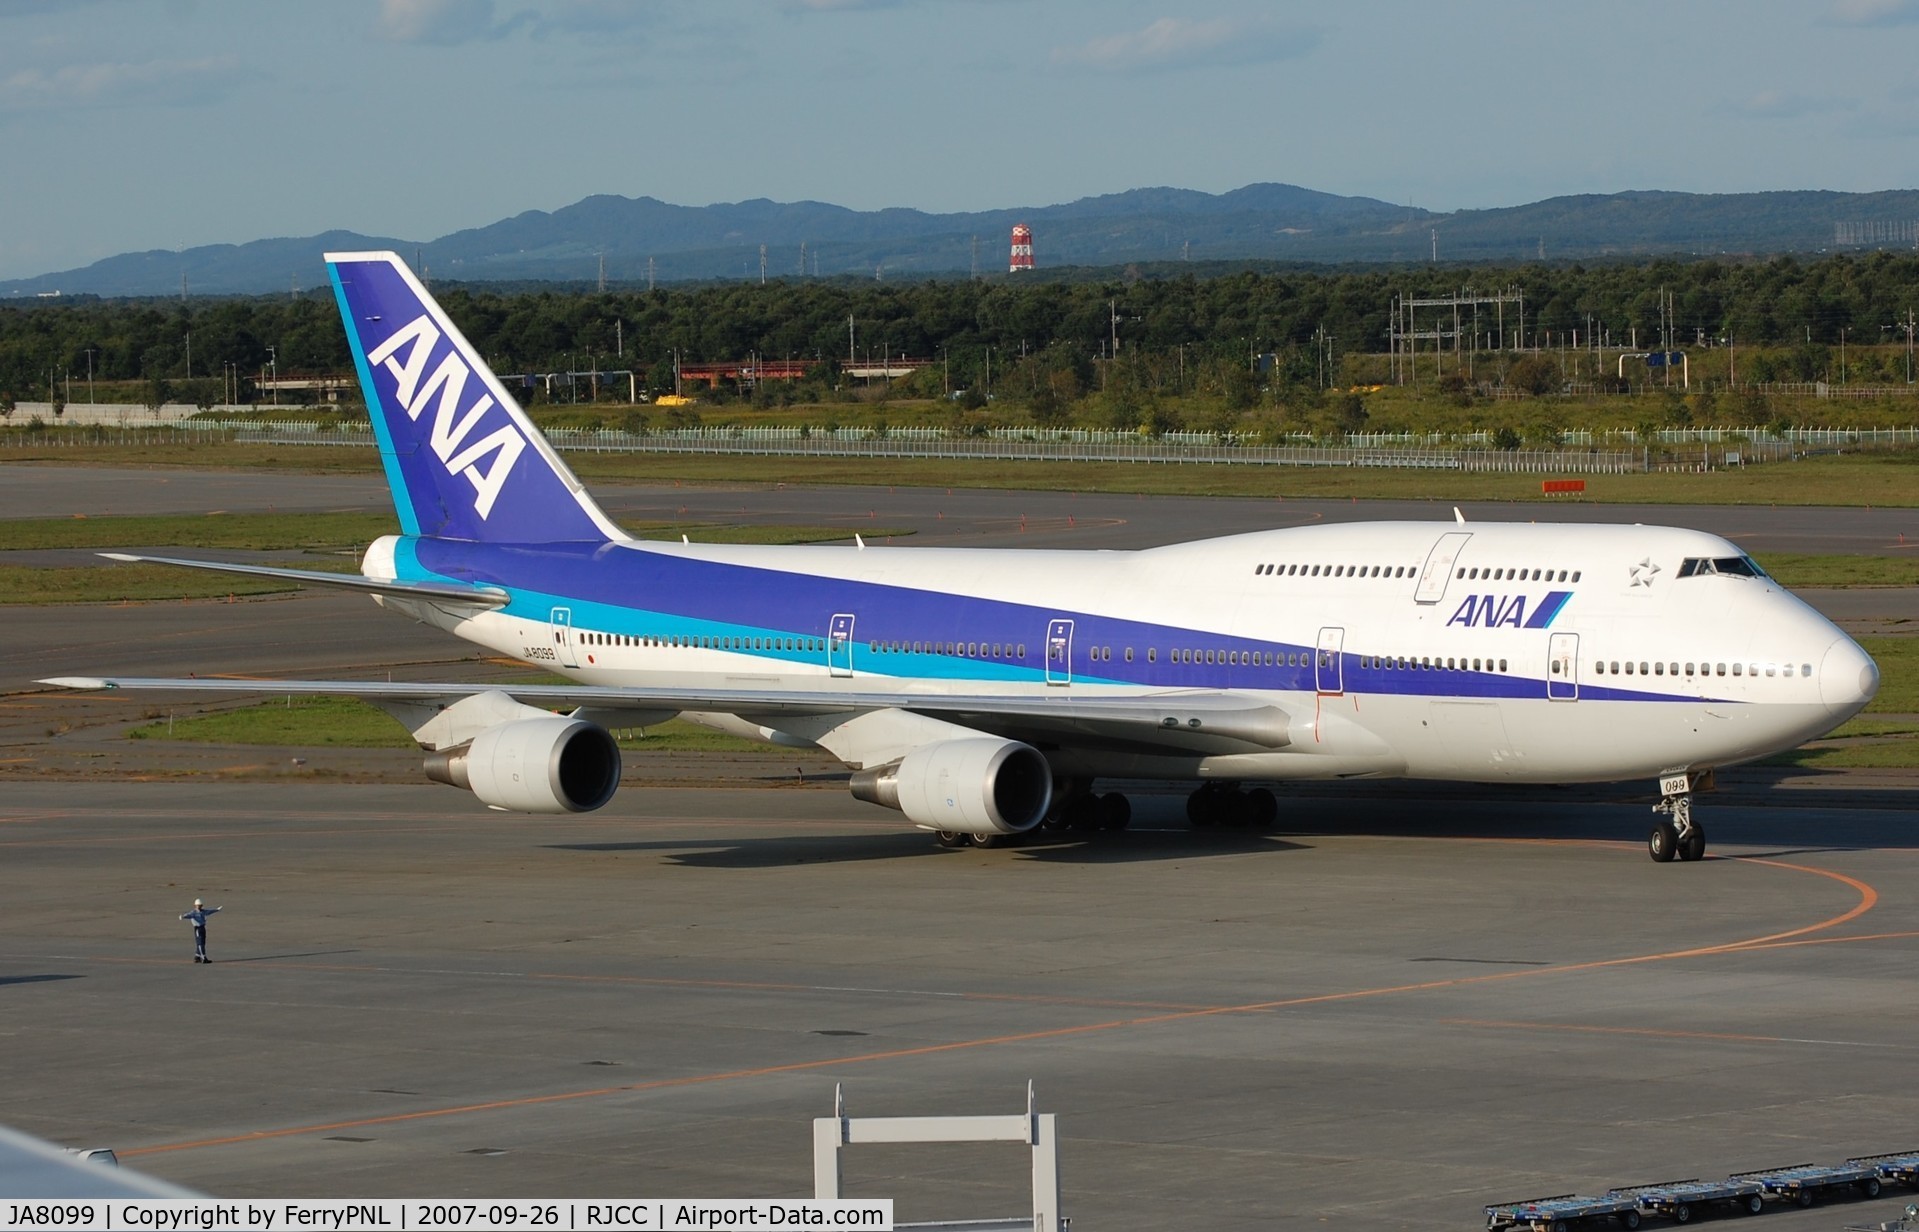 JA8099, 1991 Boeing 747-481D C/N 25292, ANA domestic B744 without winglets.